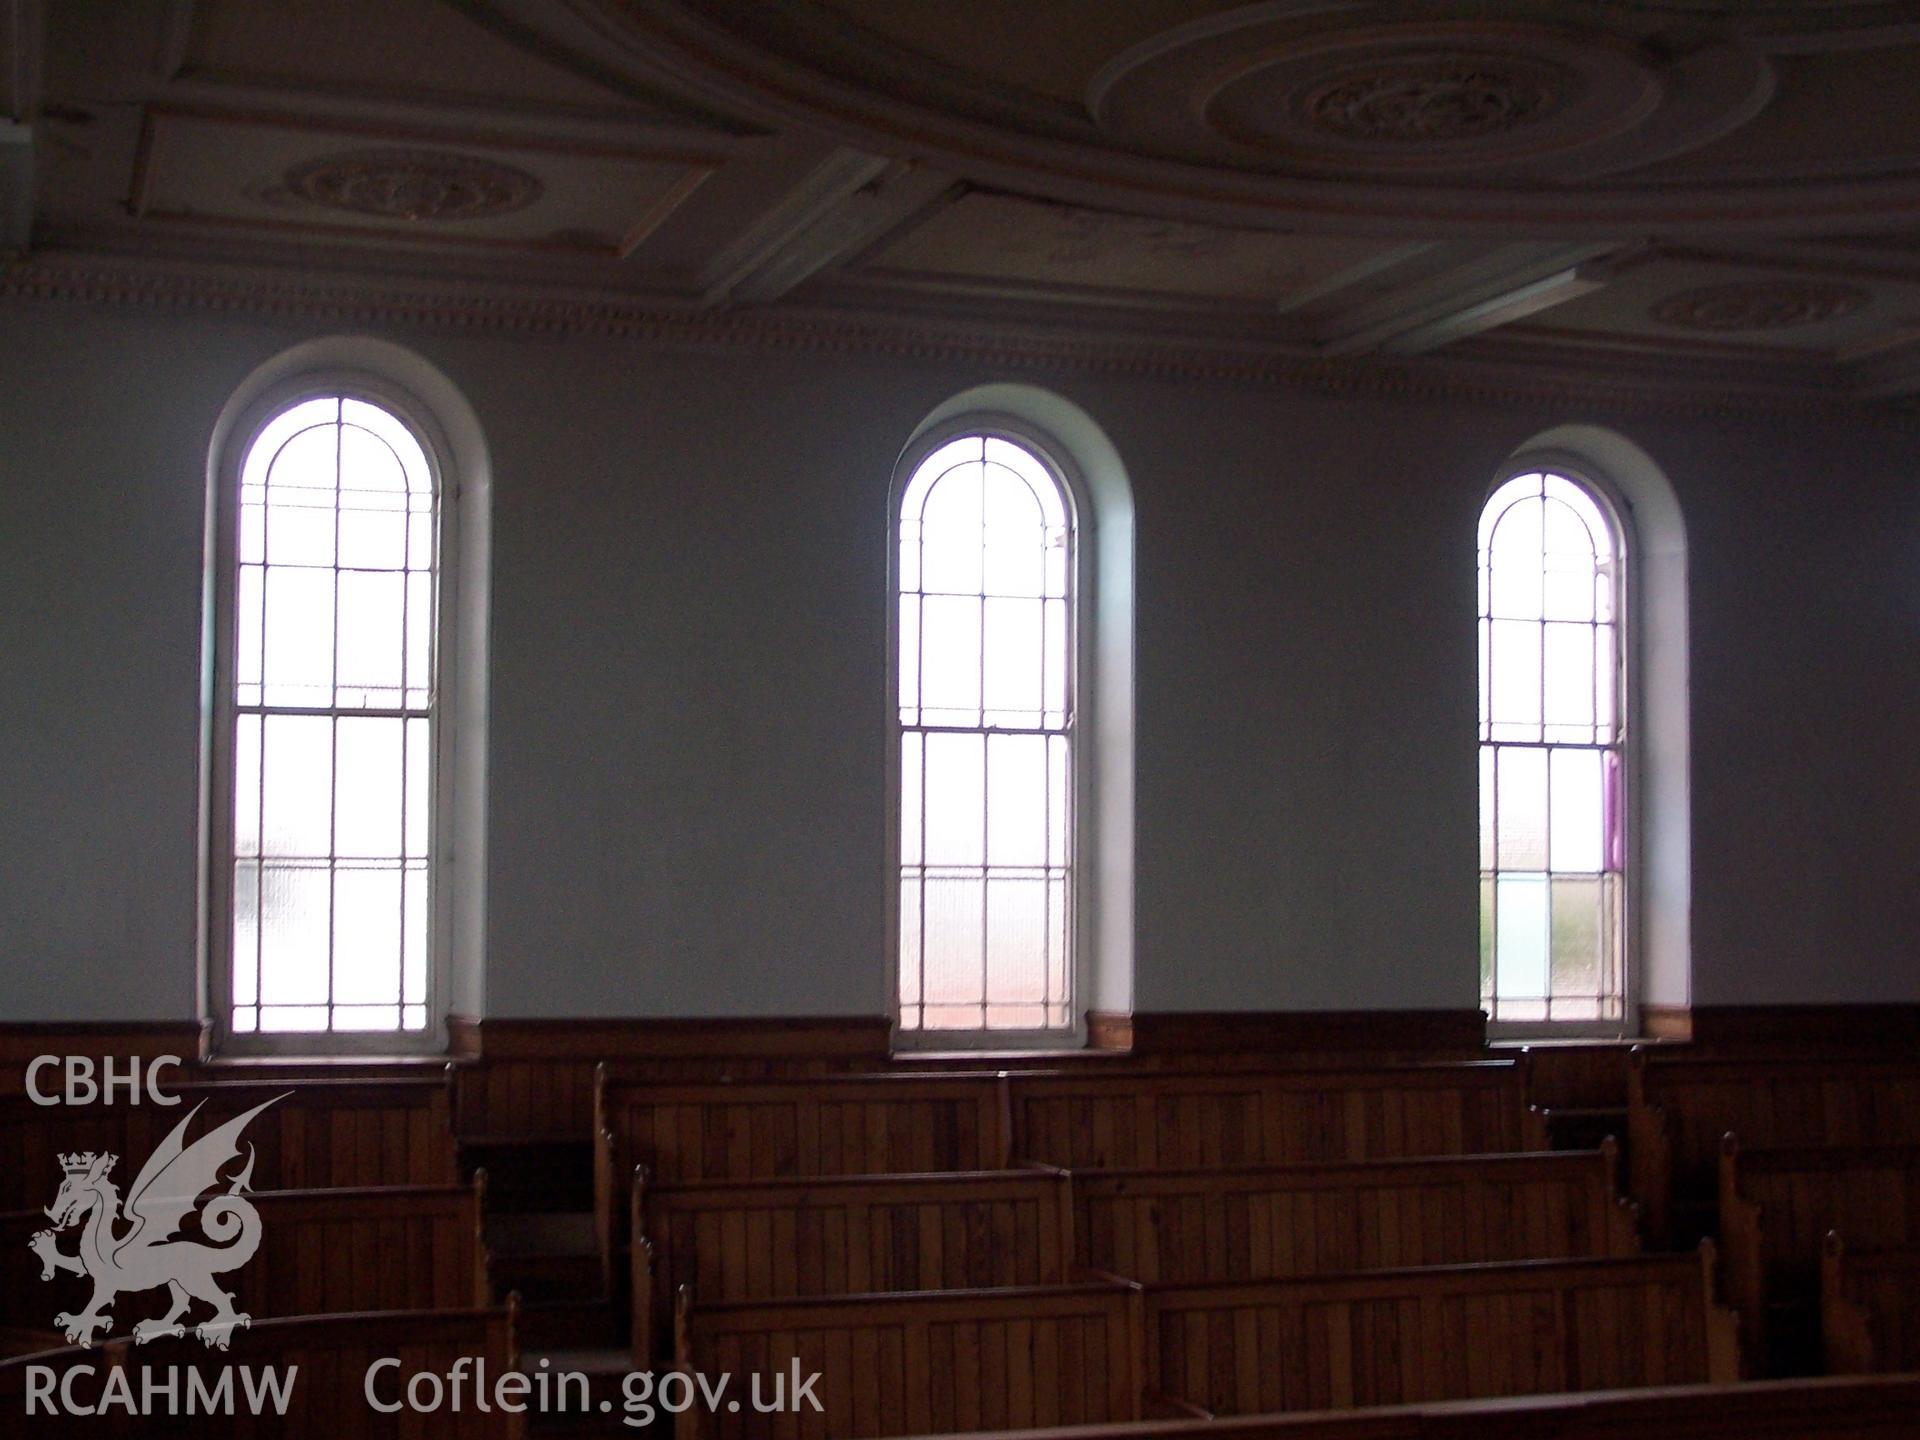 Chapel: Interior - windows in side elevation, gallery level.